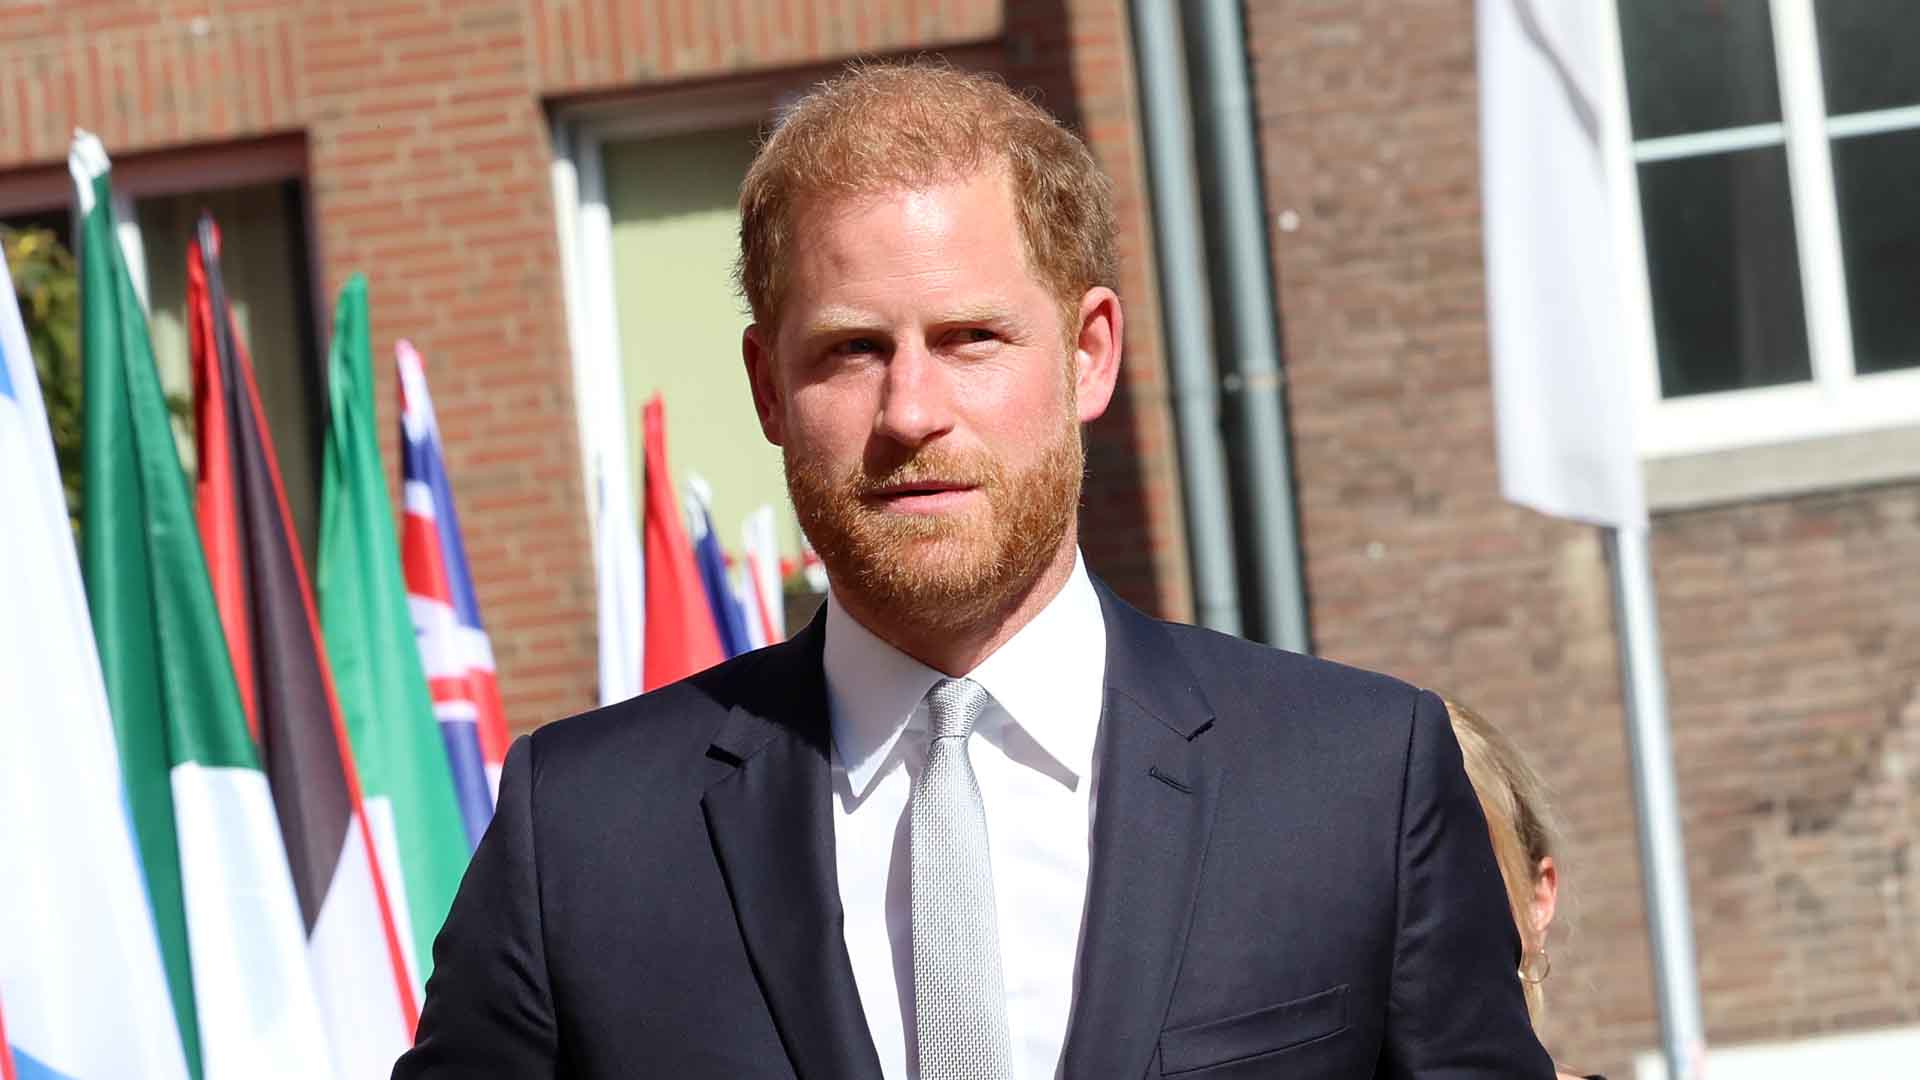 Prince Harry, Duke of Sussex arrives at the city reception at town hall during the Invictus Games Düsseldorf 2023 on September 09, 2023 in Dusseldorf, Germany.